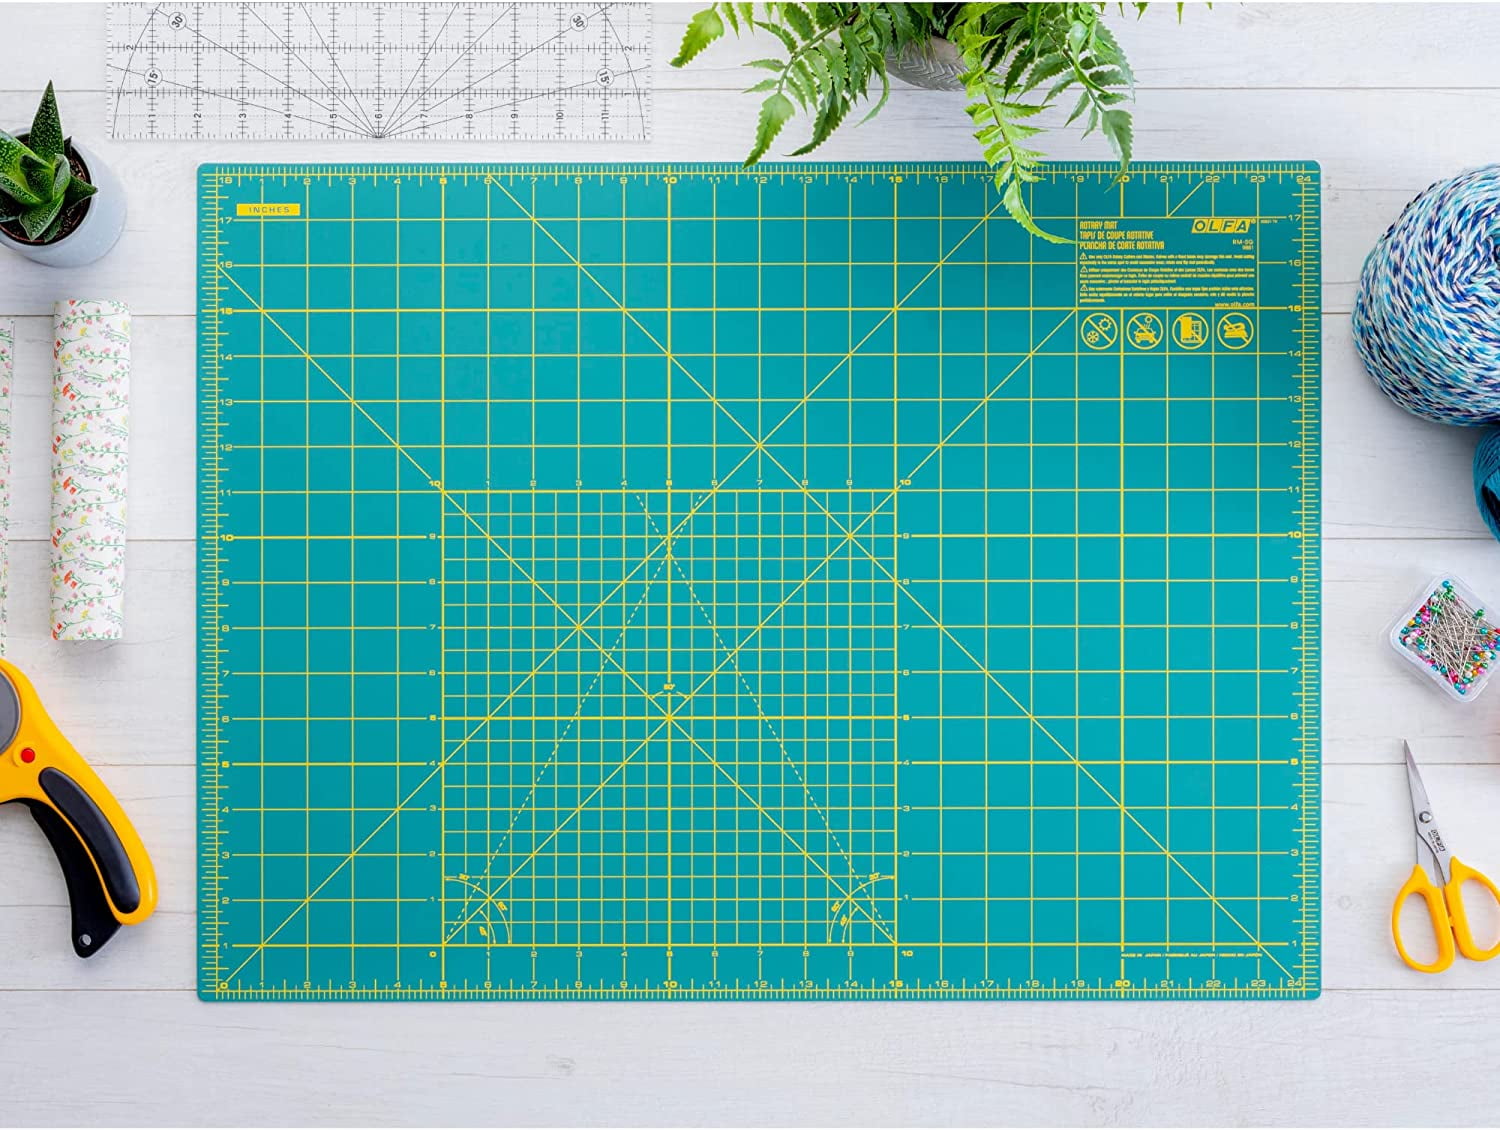  OLFA 12 x 18 Self Healing Rotary Cutting Mat (RM-CG) - Double  Sided 12x18 Inch Cutting Mat with Grid for Quilting, Sewing, Fabric, &  Crafts, Designed for Use with Rotary Cutters (